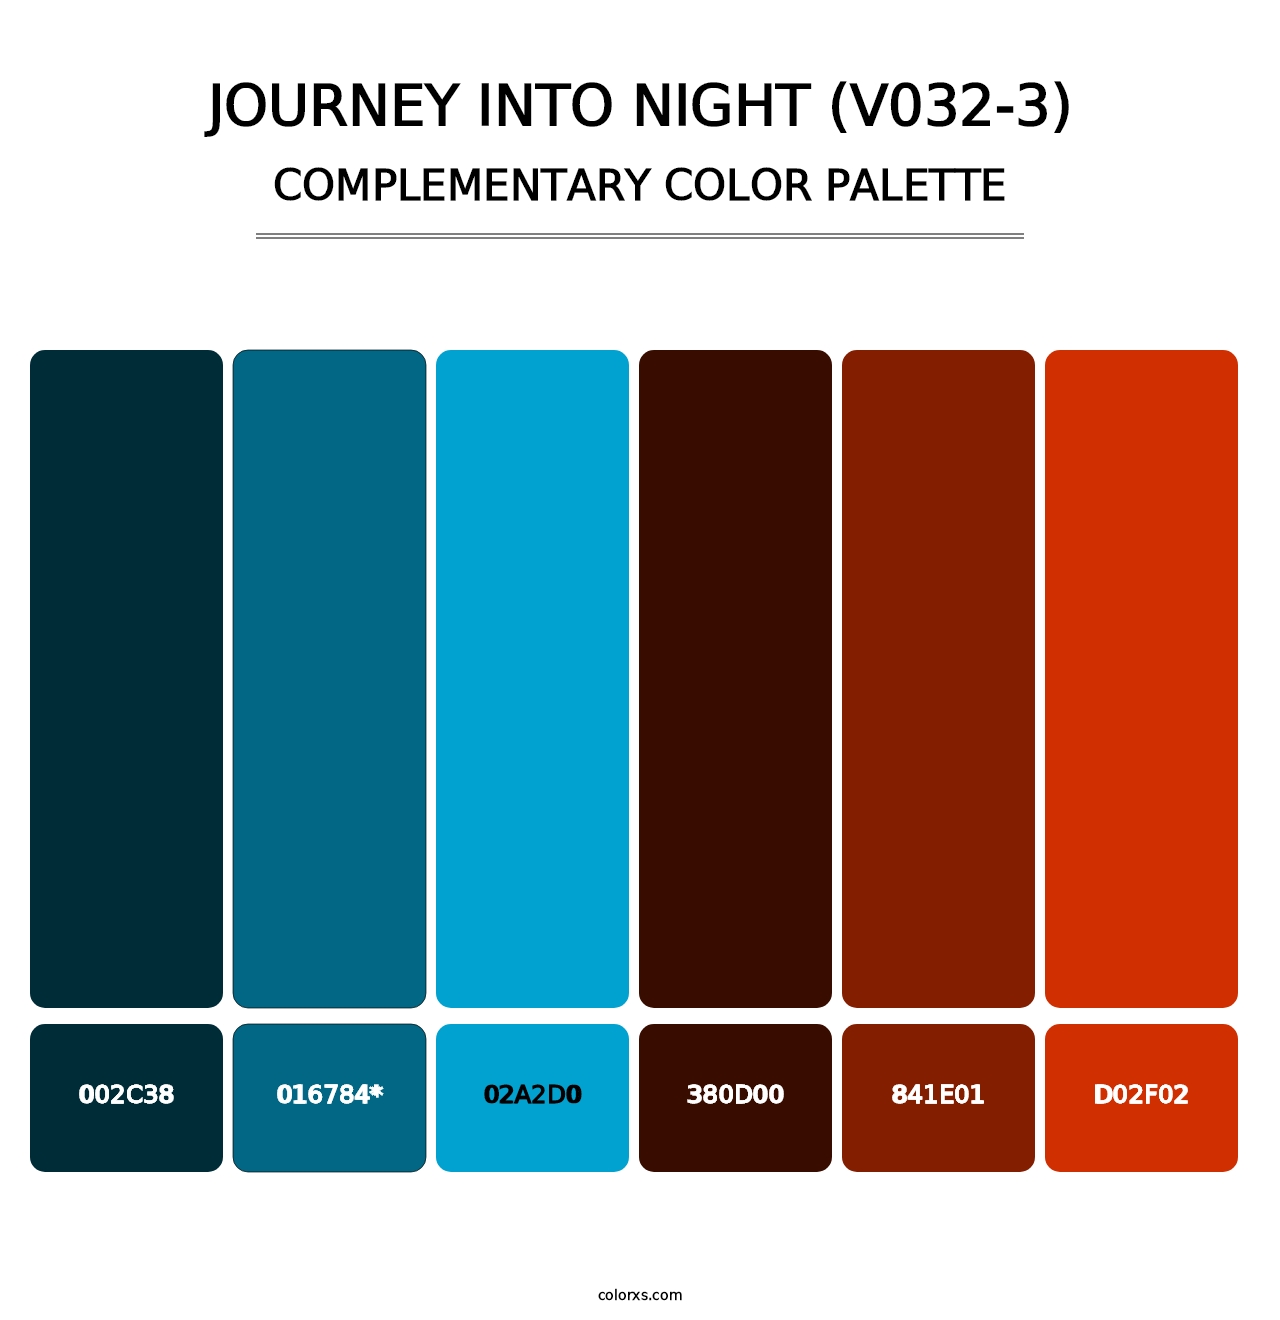 Journey Into Night (V032-3) - Complementary Color Palette